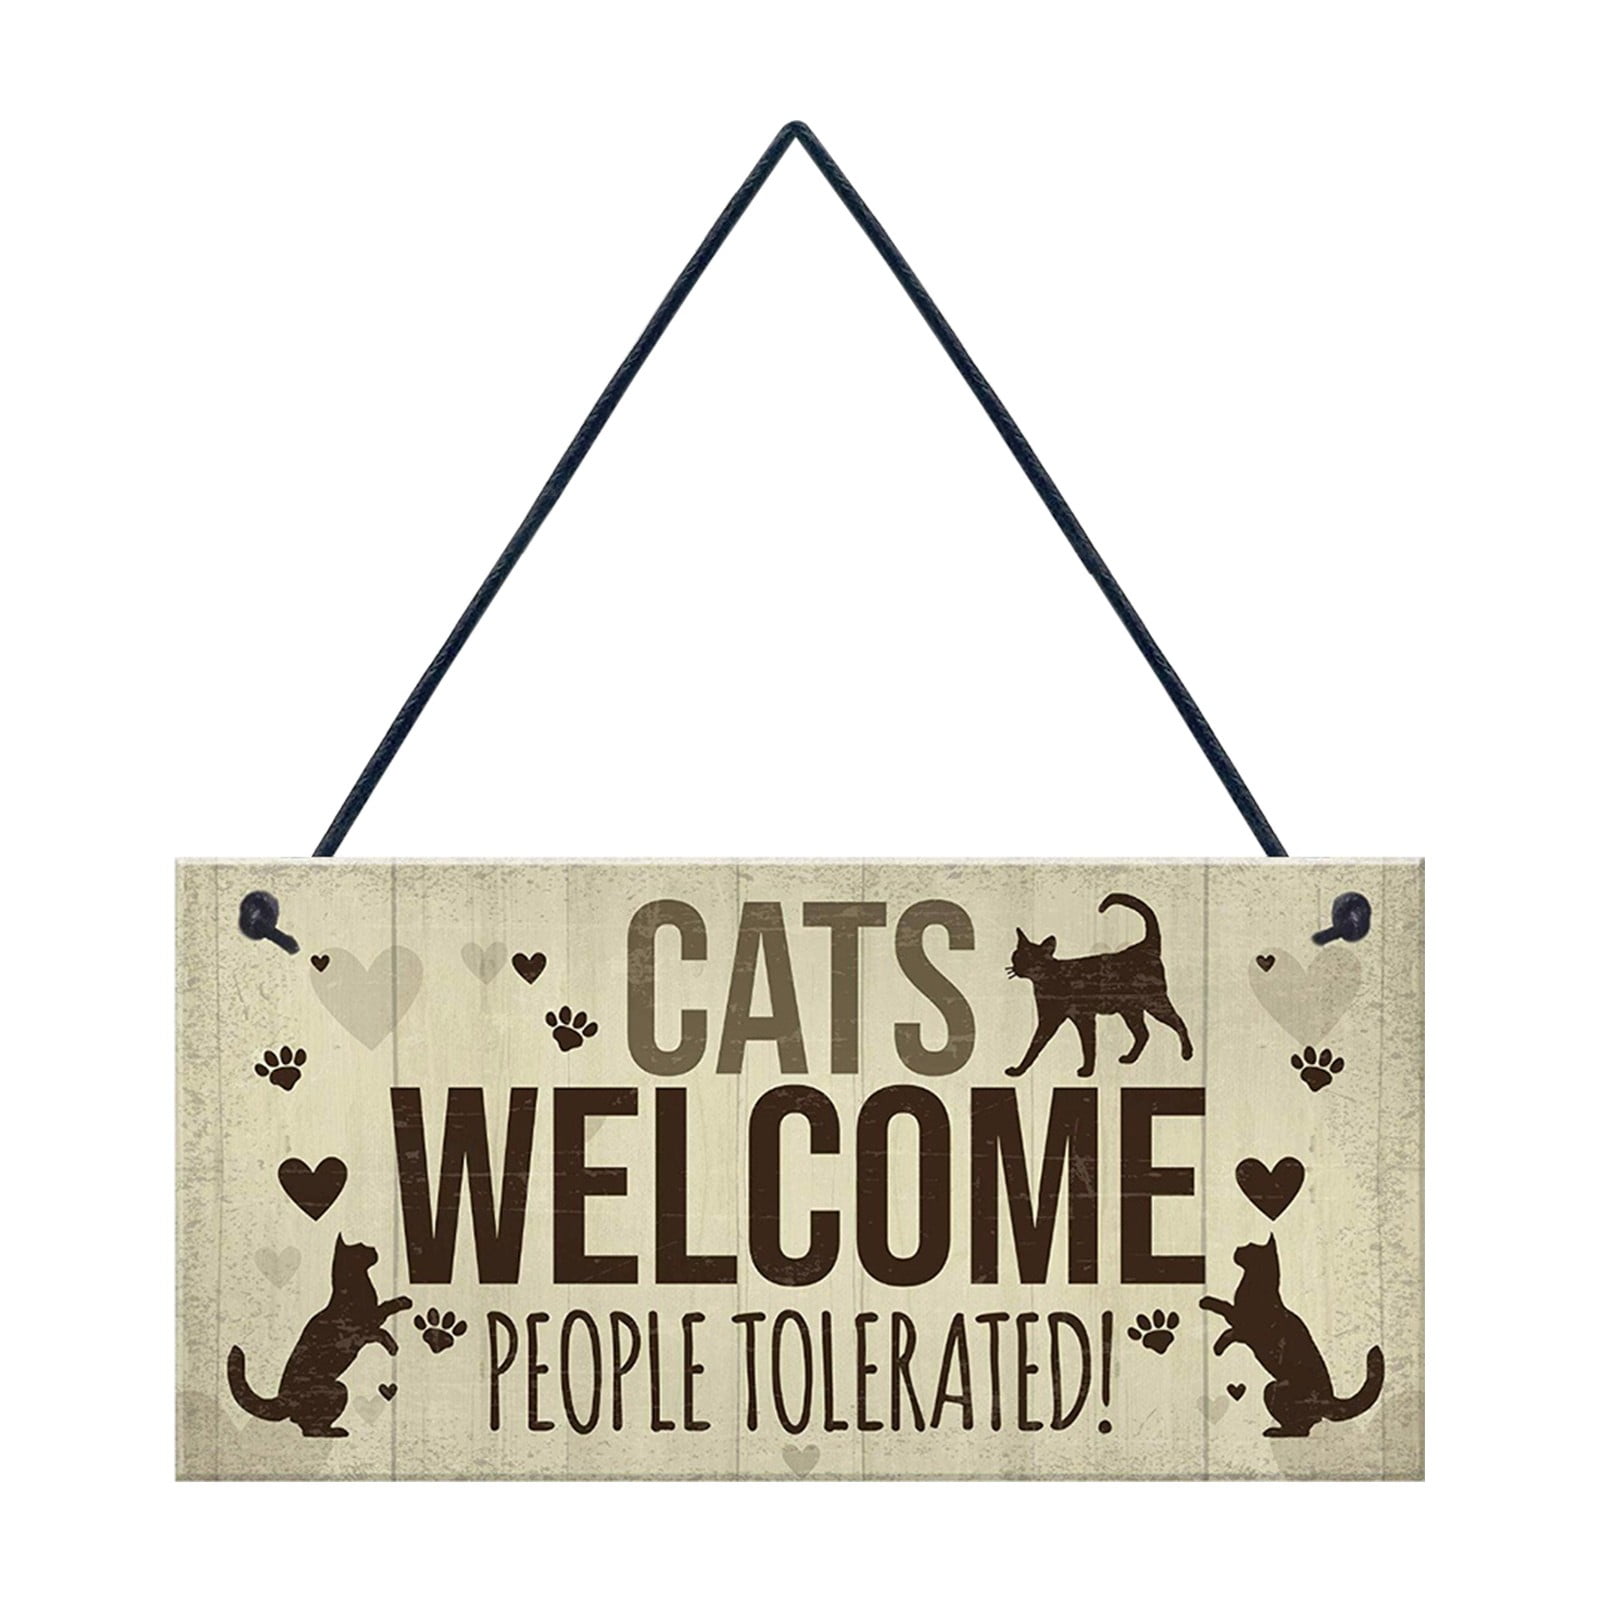 Cats Welcome People Tolerated Garden Banner Flag 11X14 To 12x18 Wood Style Decor 